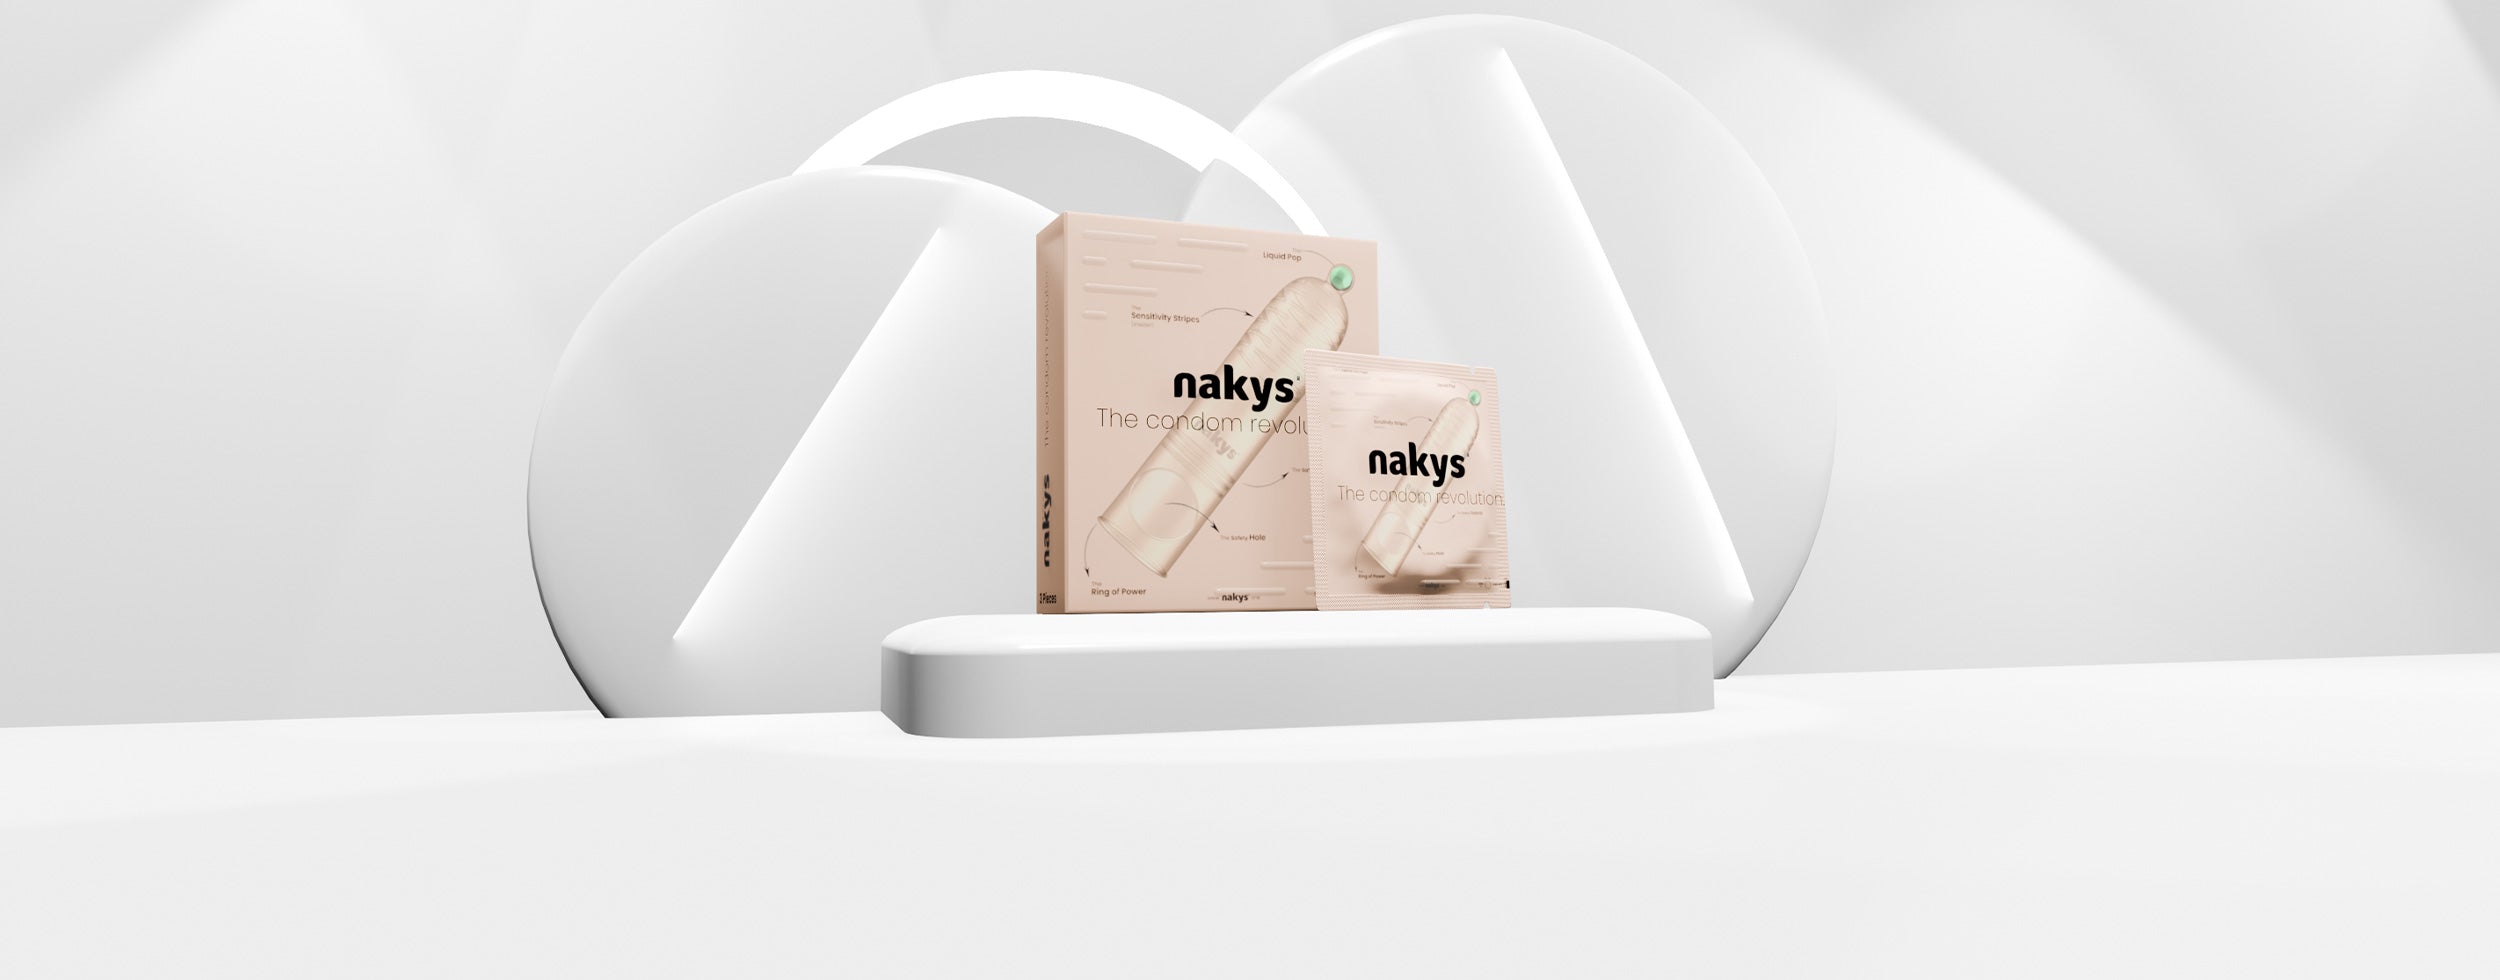 NAKYS-Moods-240221-QUER-5